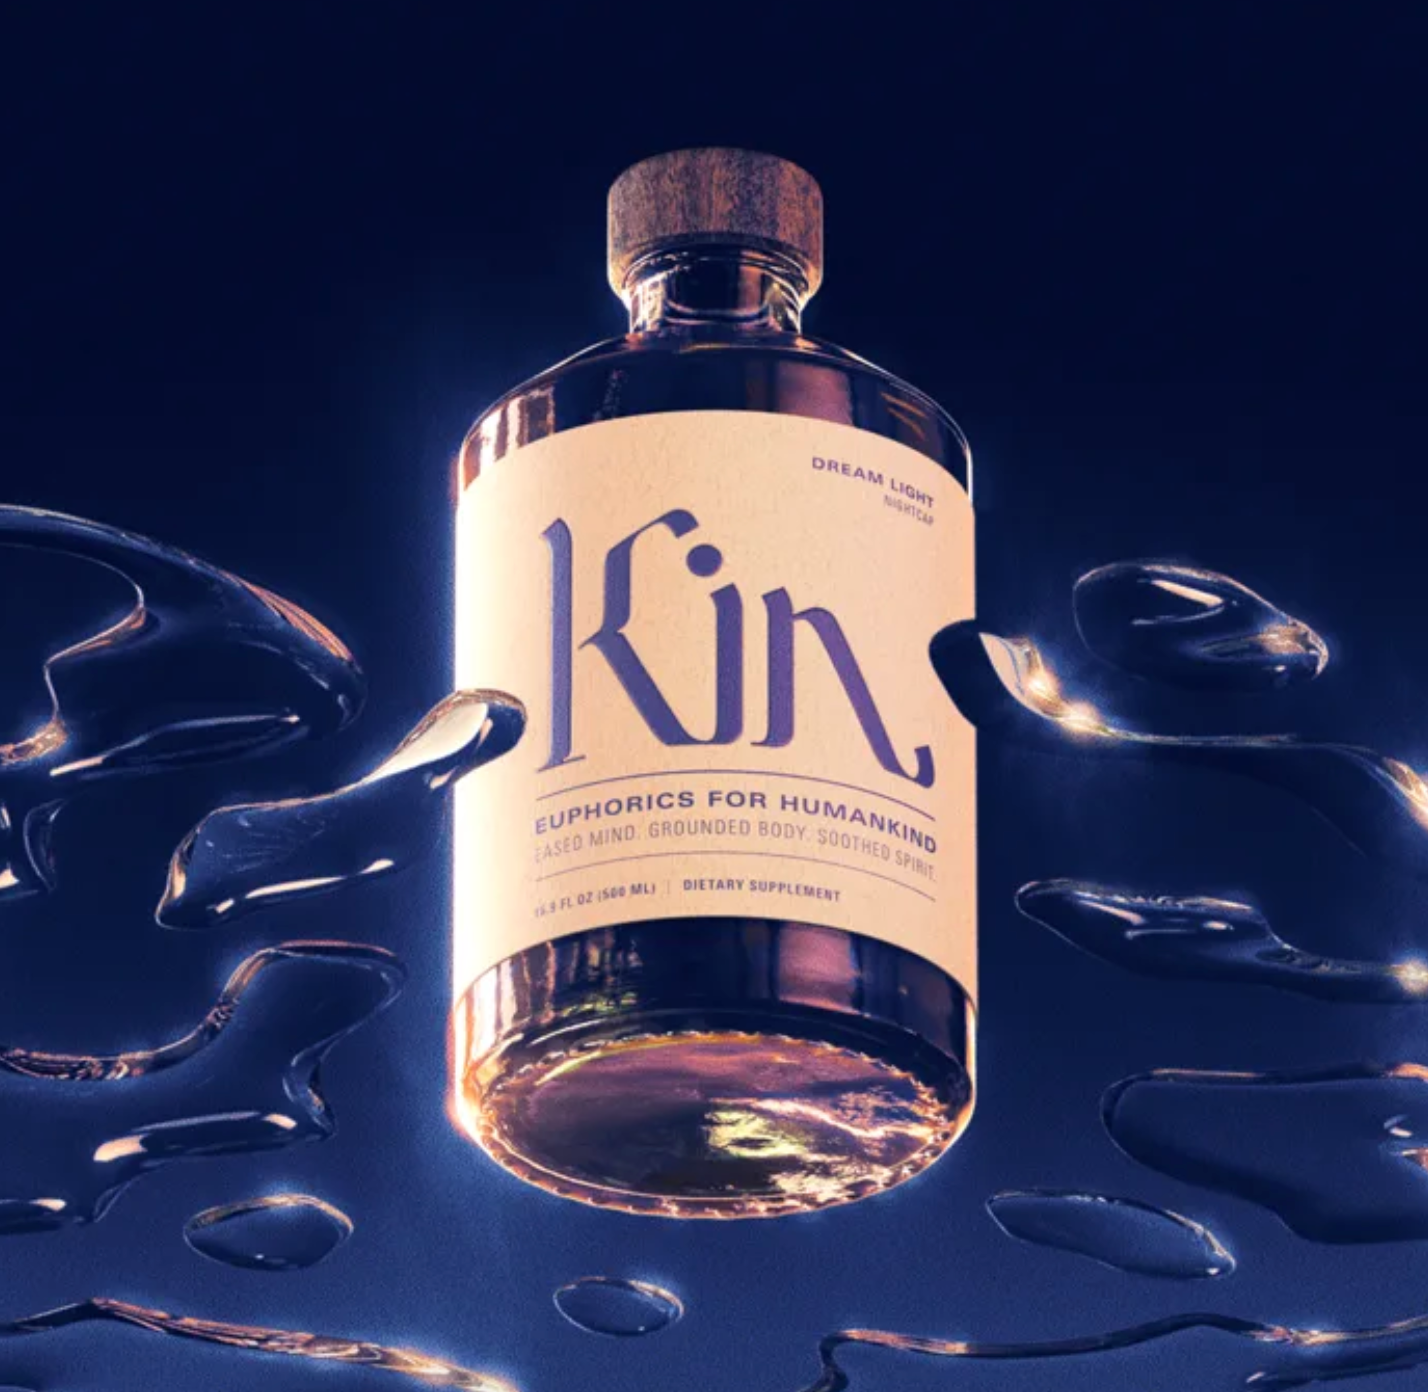 Kin Euophorics has compelling product photography.